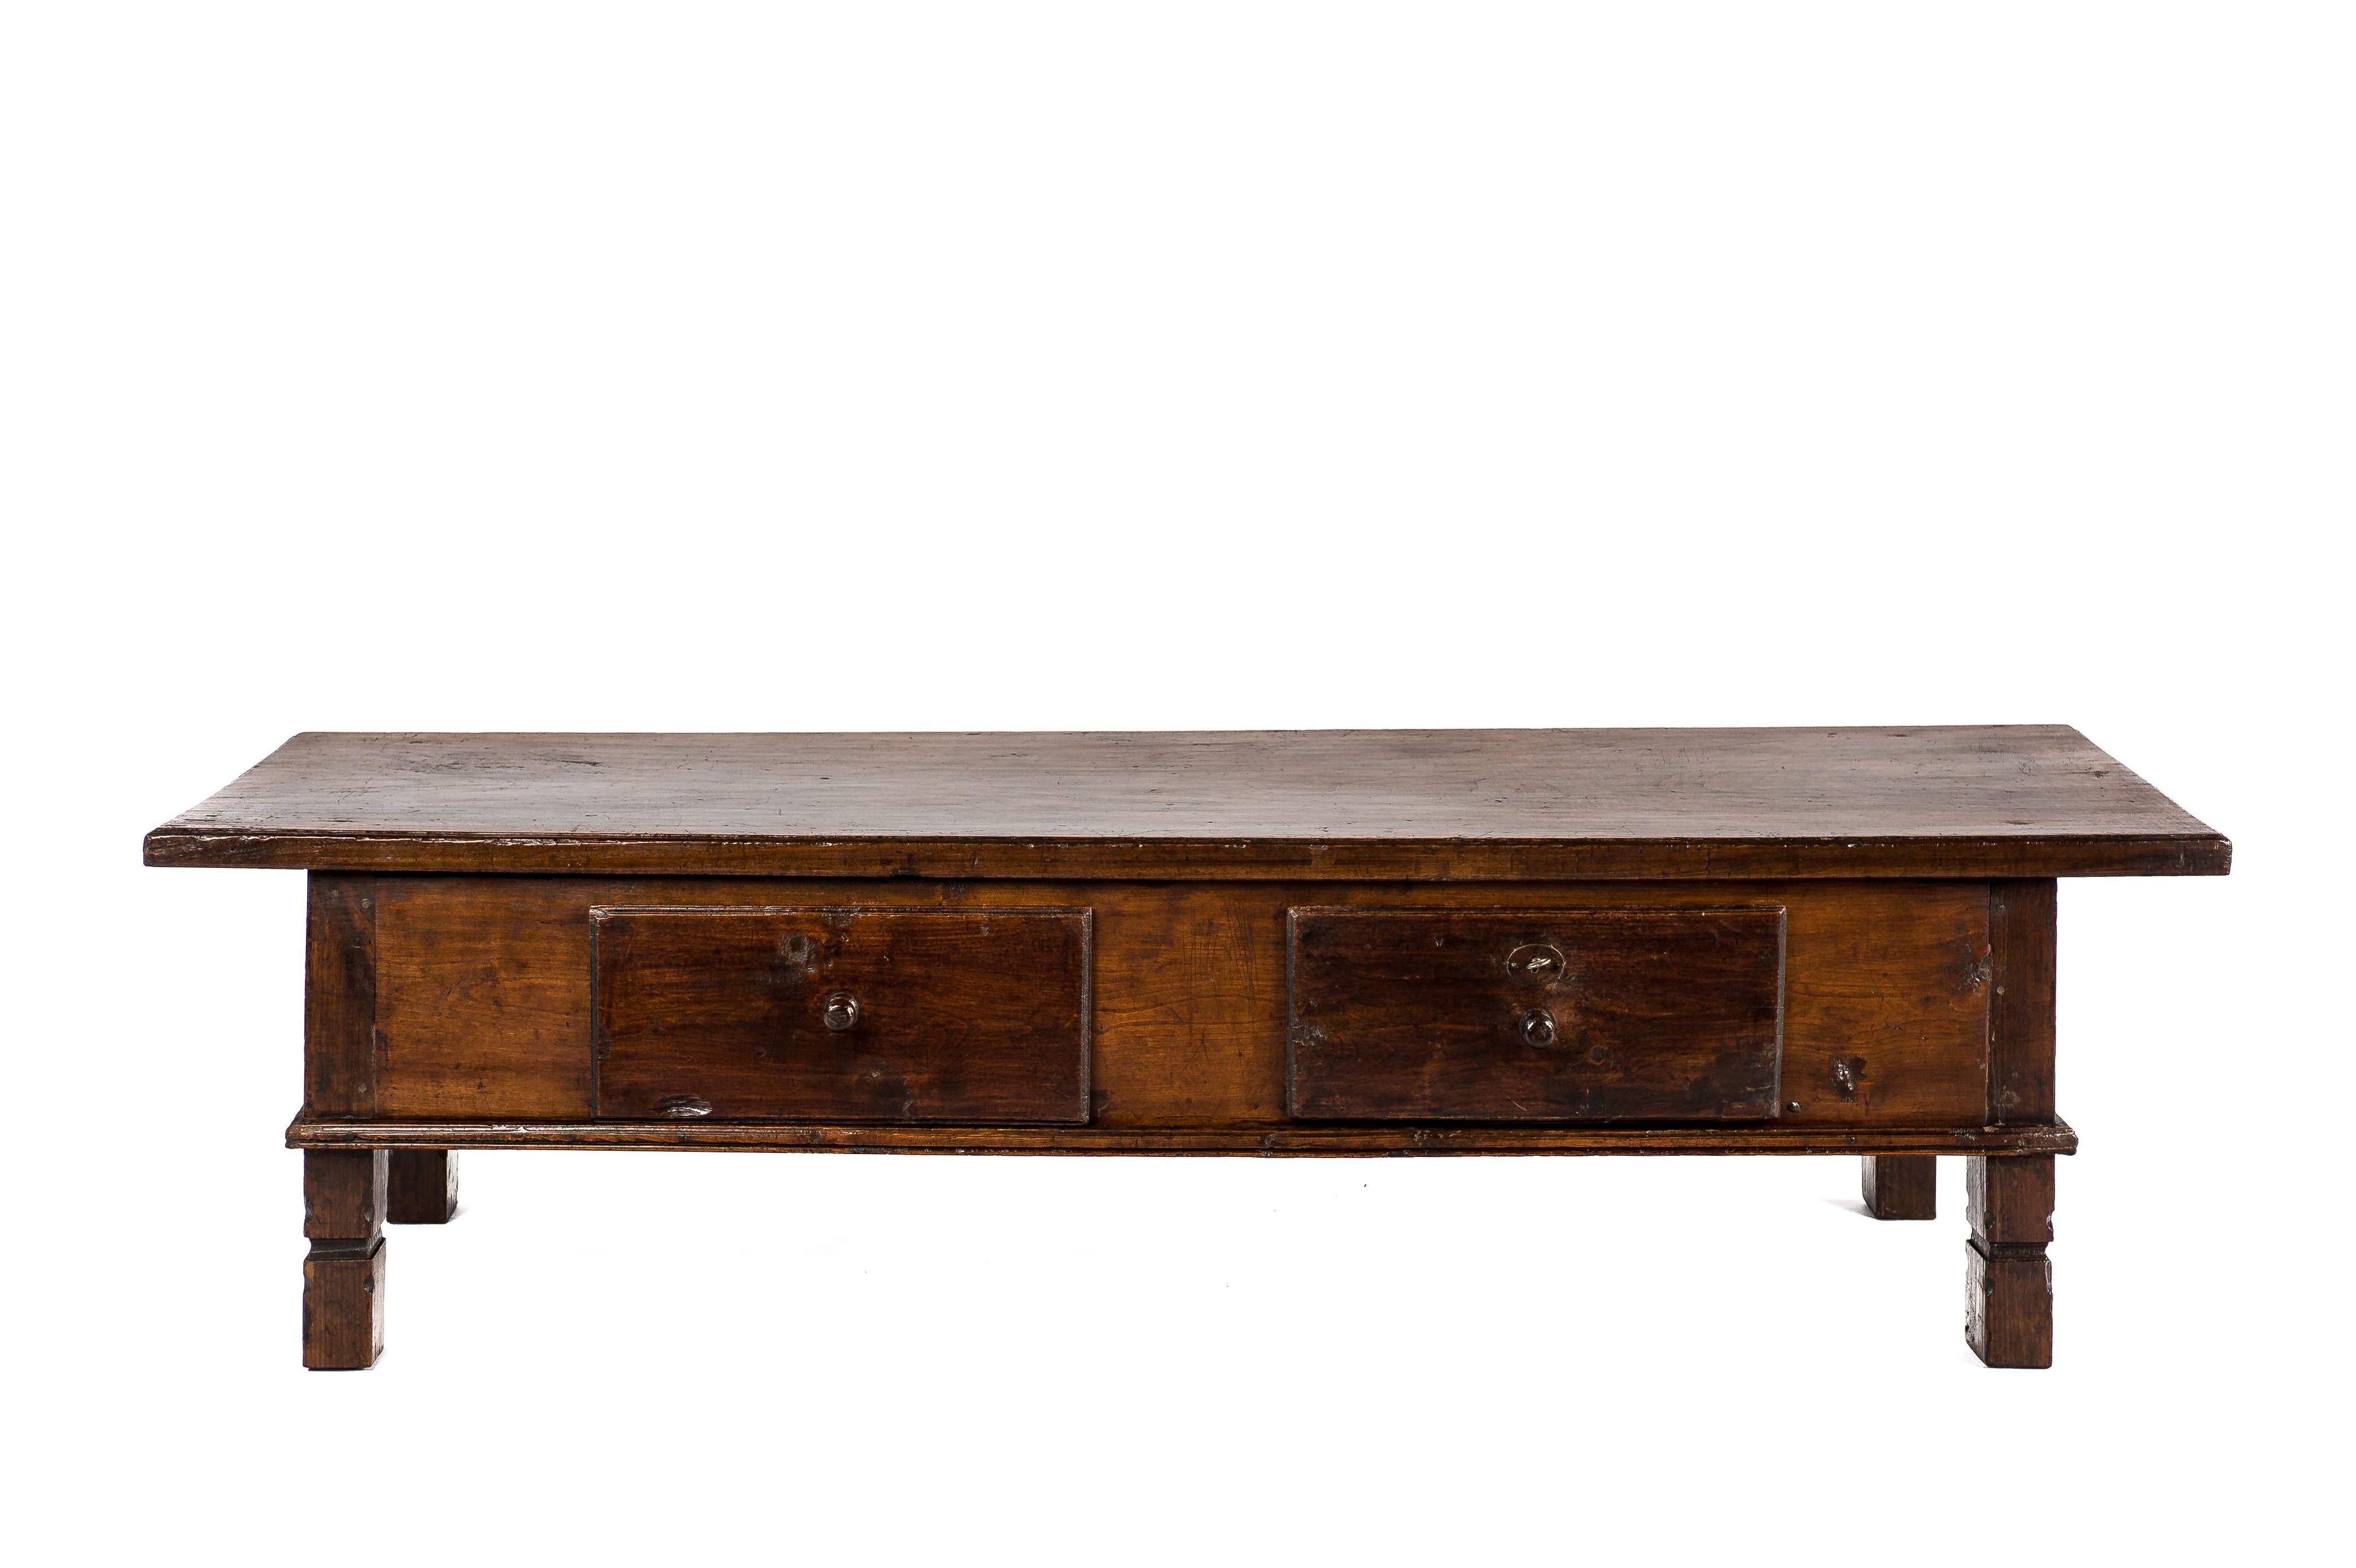 This beautiful warm brown color rustic coffee table or low table originates in rural Spain and dates circa 1780. The table has a unique top that was made from a single board of solid chestnut wood that is 1.6 inches thick and features molding at the